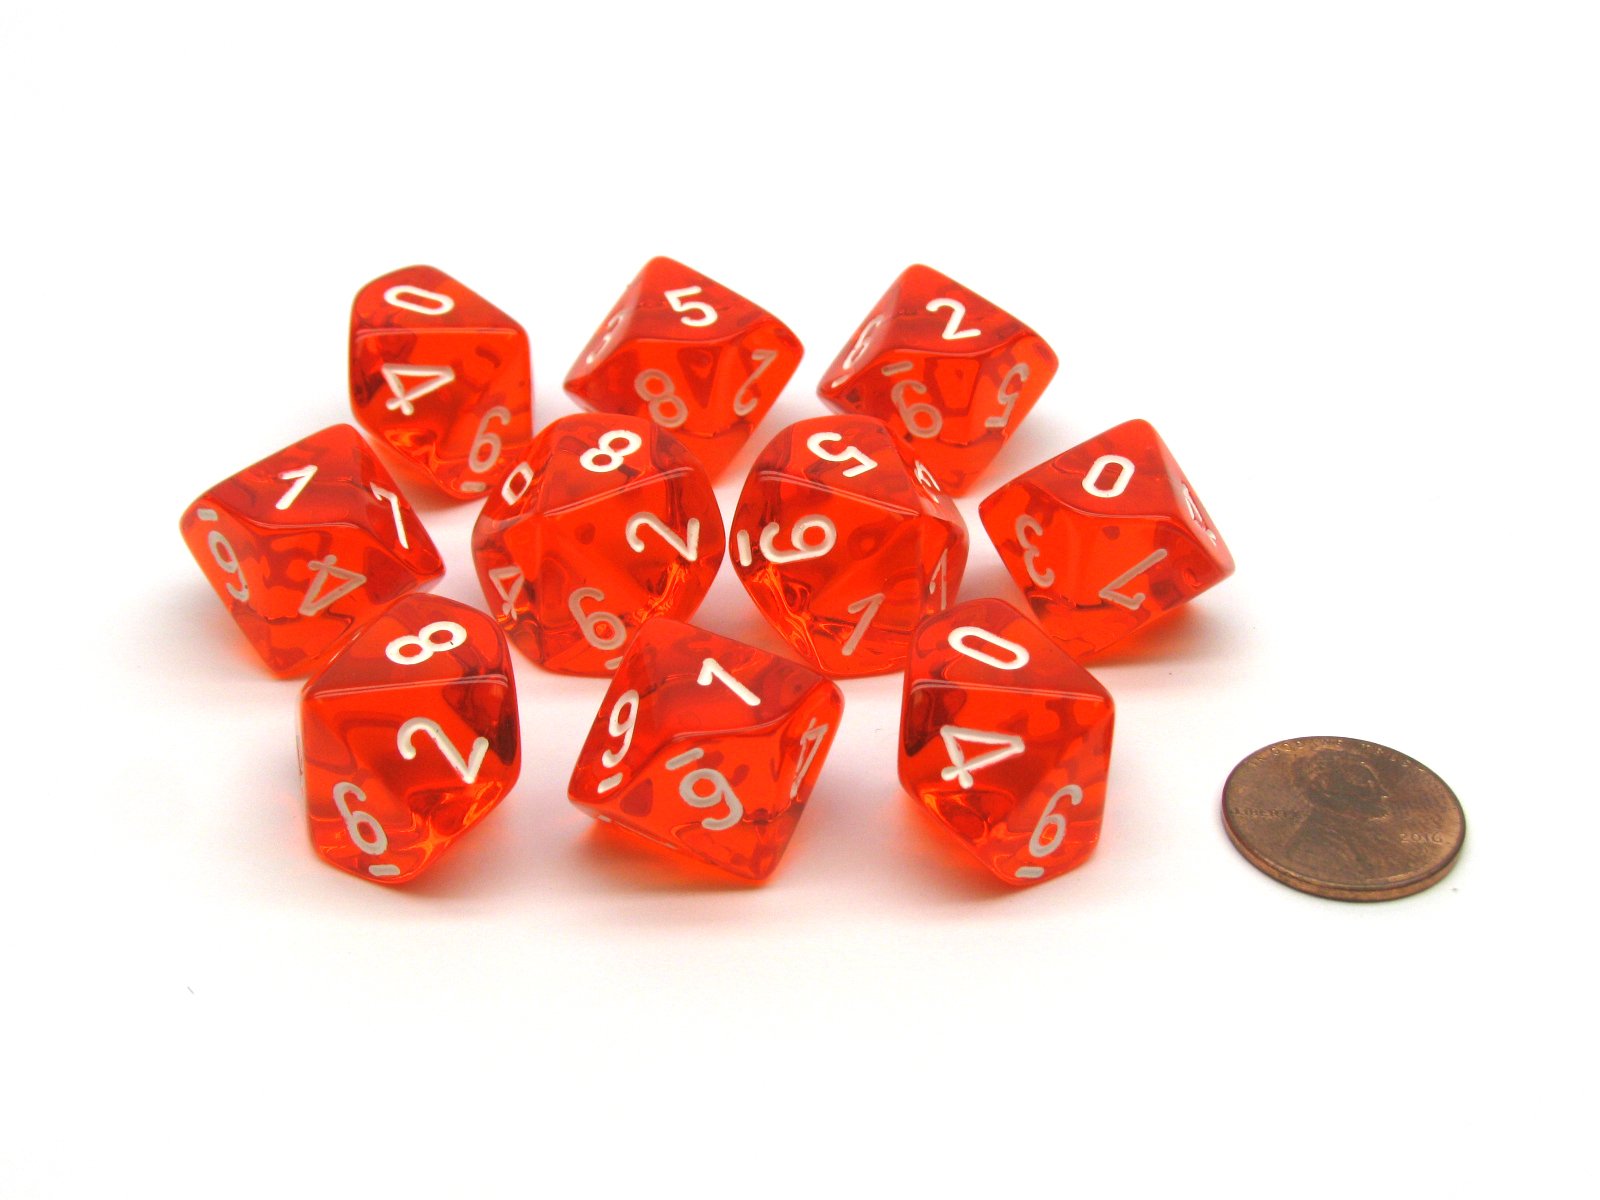 Chessex: Translucent D10 Dice Set | North Valley Games